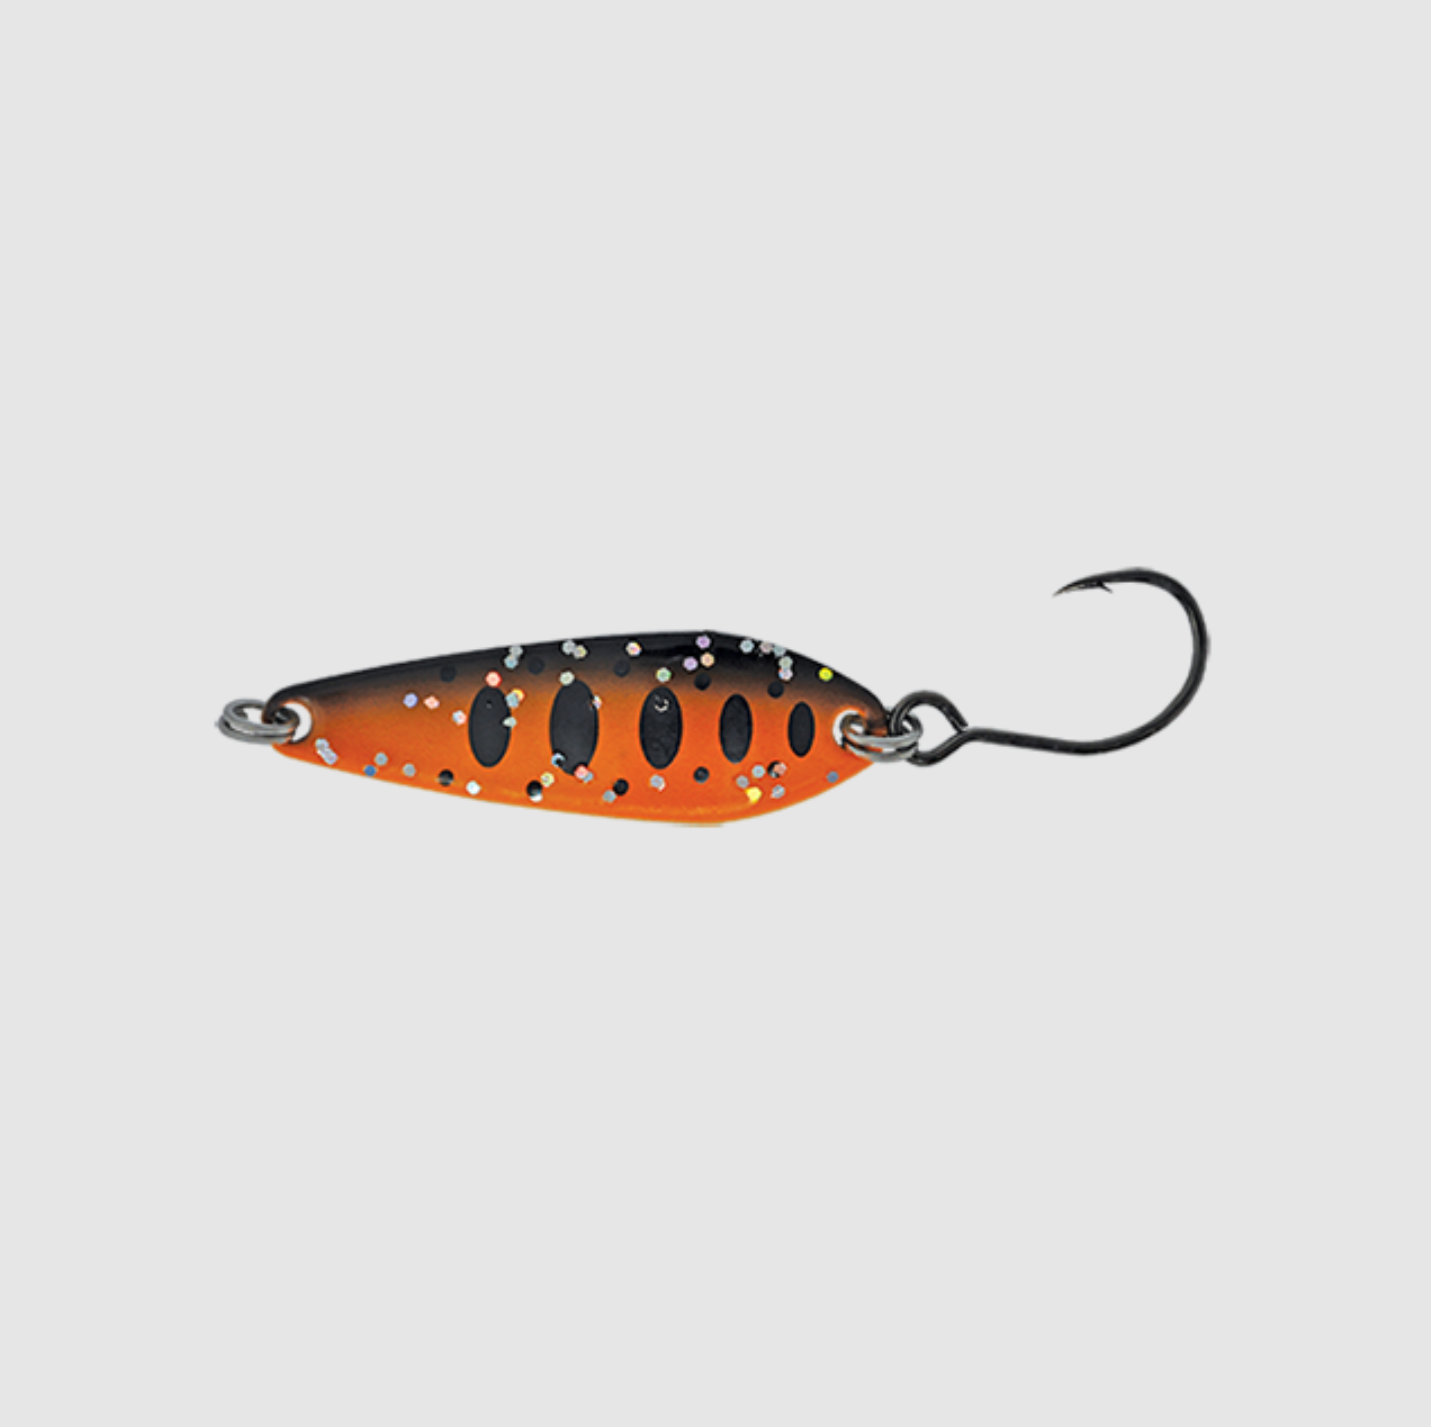 Bushranger Micro Spoon - 057 – Trophy Trout Lures and Fly Fishing